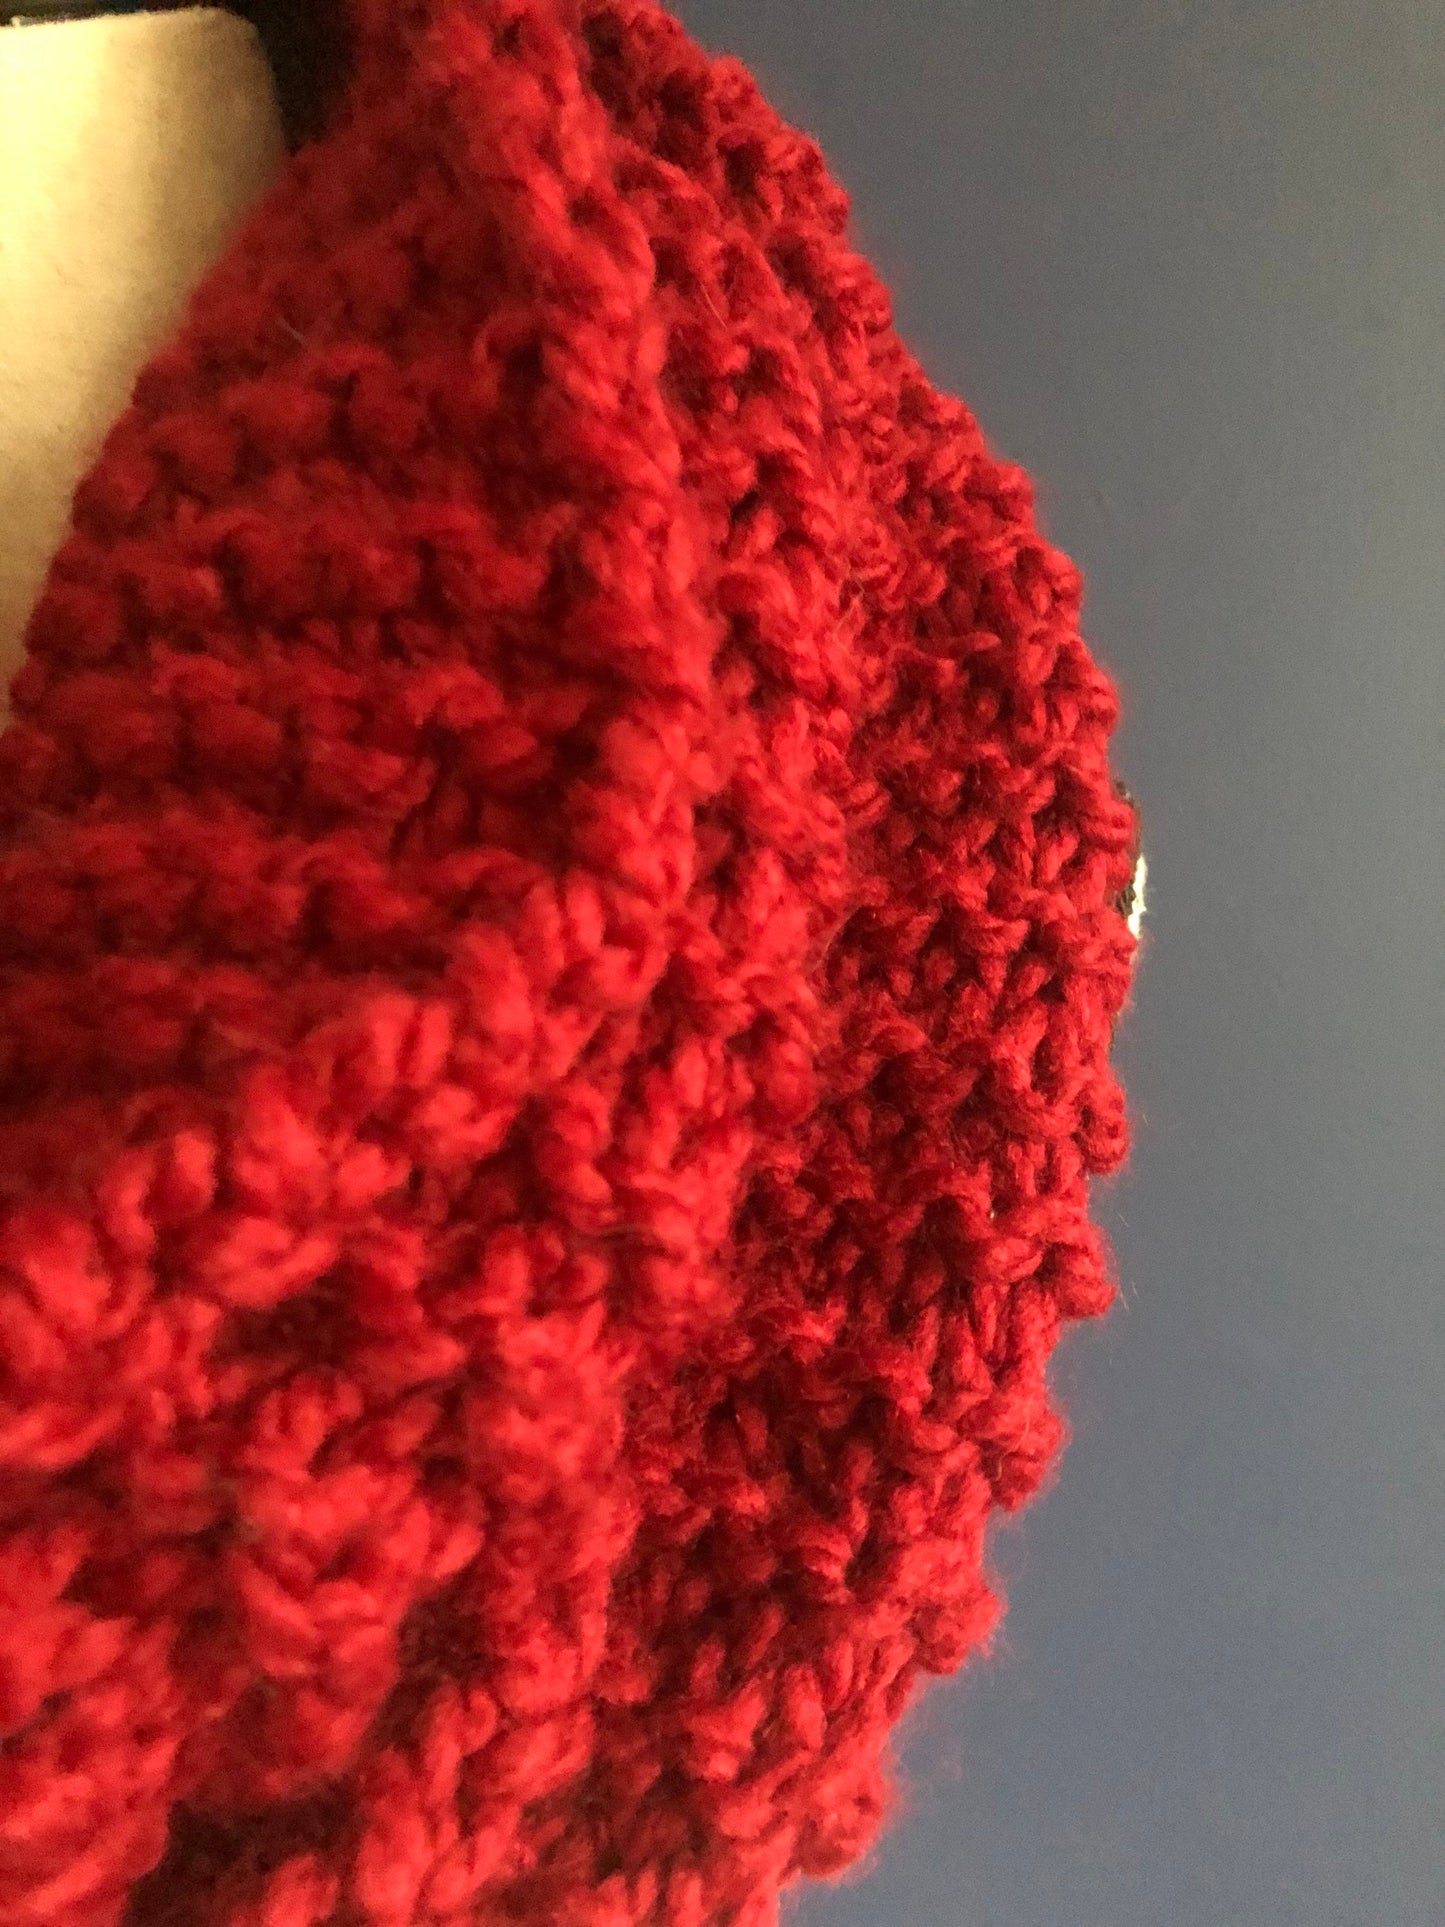 Knit Scarf. Red Oversized Infinity Scarf. Cranberry Chunky Knit Scarf. Gift for Me. Women's Accessories. Winter Accessories.